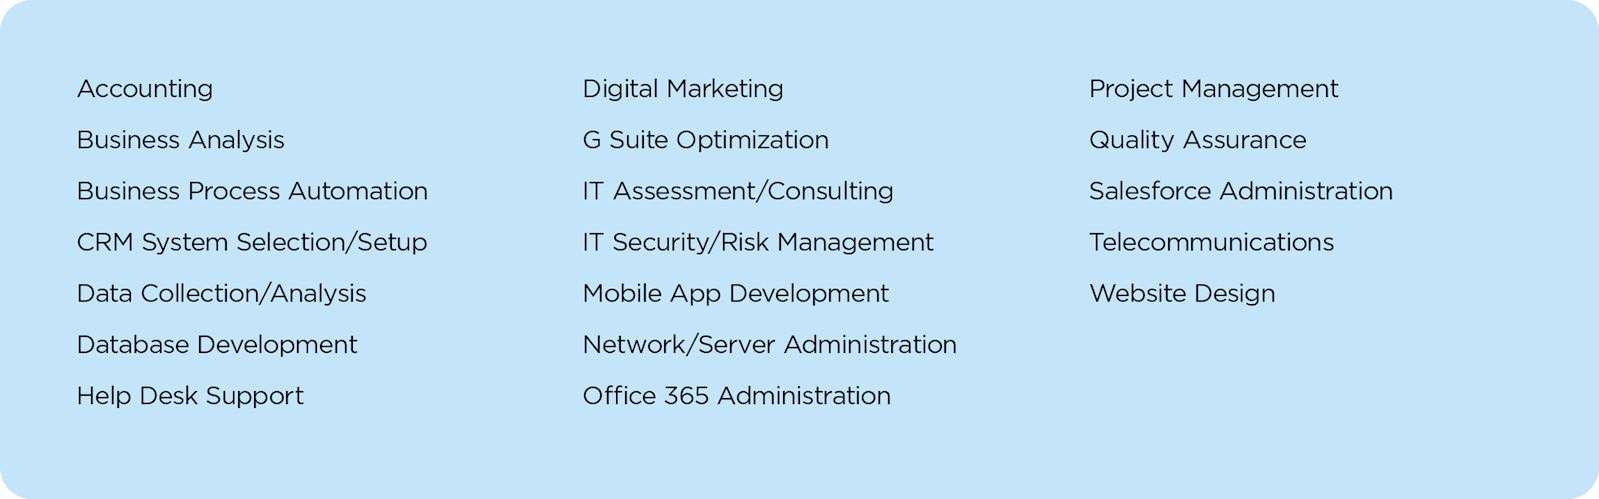 Accounting, business analysis, business process automation, CRM system selection/setup, data collection/analysis, database development, digital marketing, G suite, IT assessment/consulting, IT security/risk mgmt, Mobile app development, network/server administration, project mgmt, quality assurance, salesforce administration, telecommunications, website design